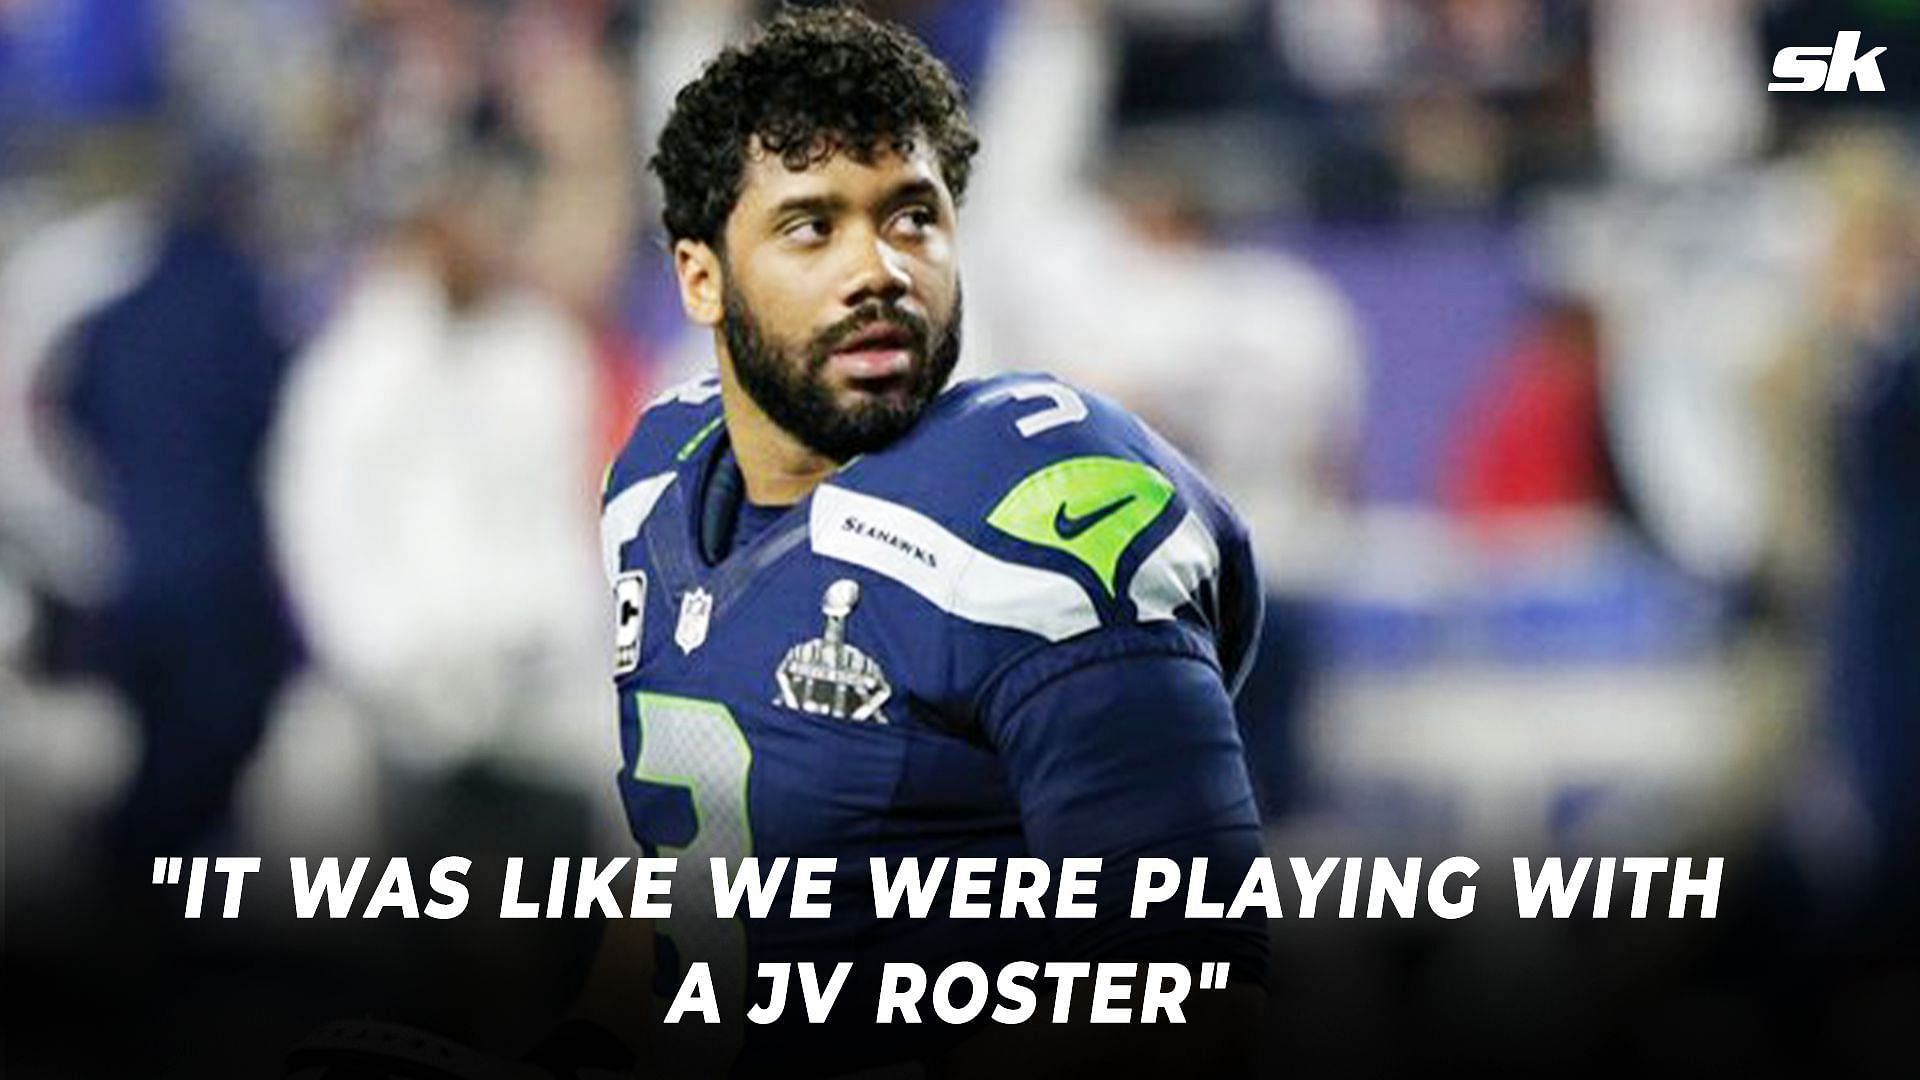 Russell Wilson has recently completed a trade from the Seahawks to the Denver Broncos